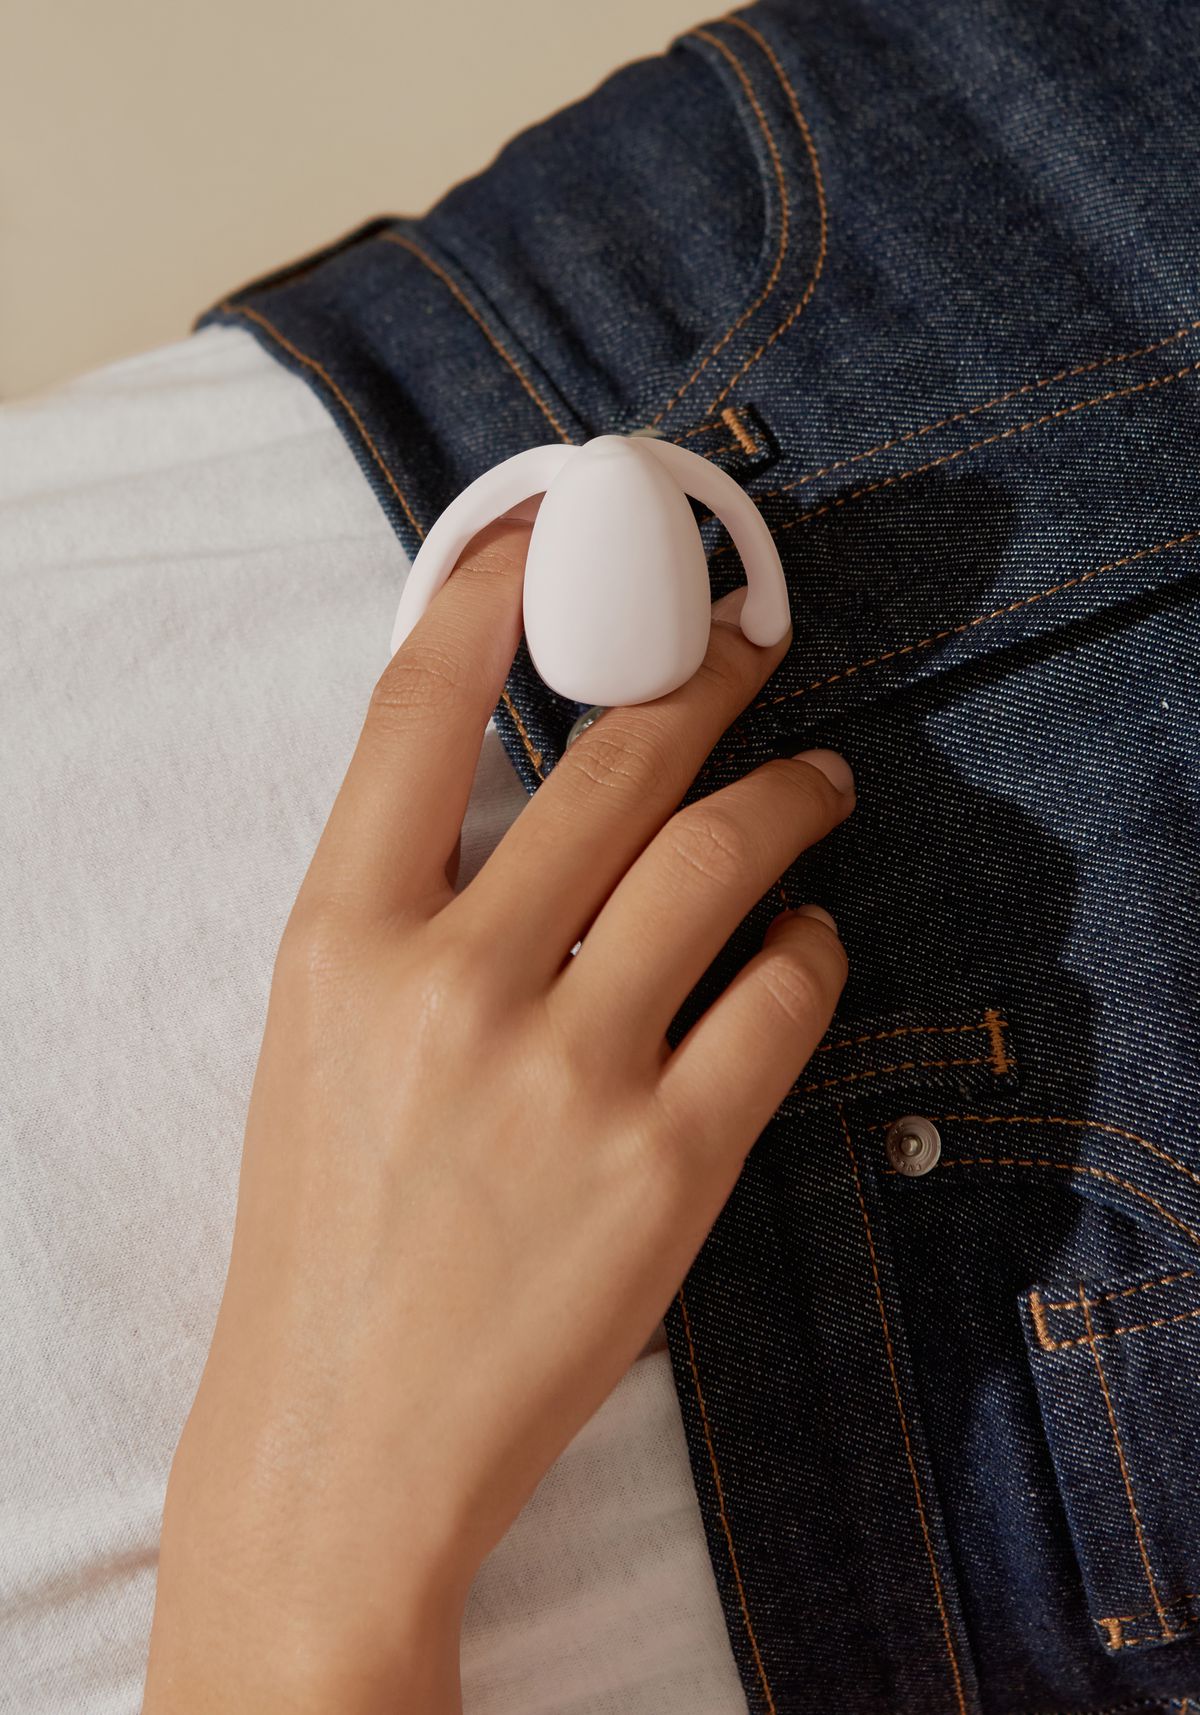 A woman wearing jeans holding an egg shaped vibrator